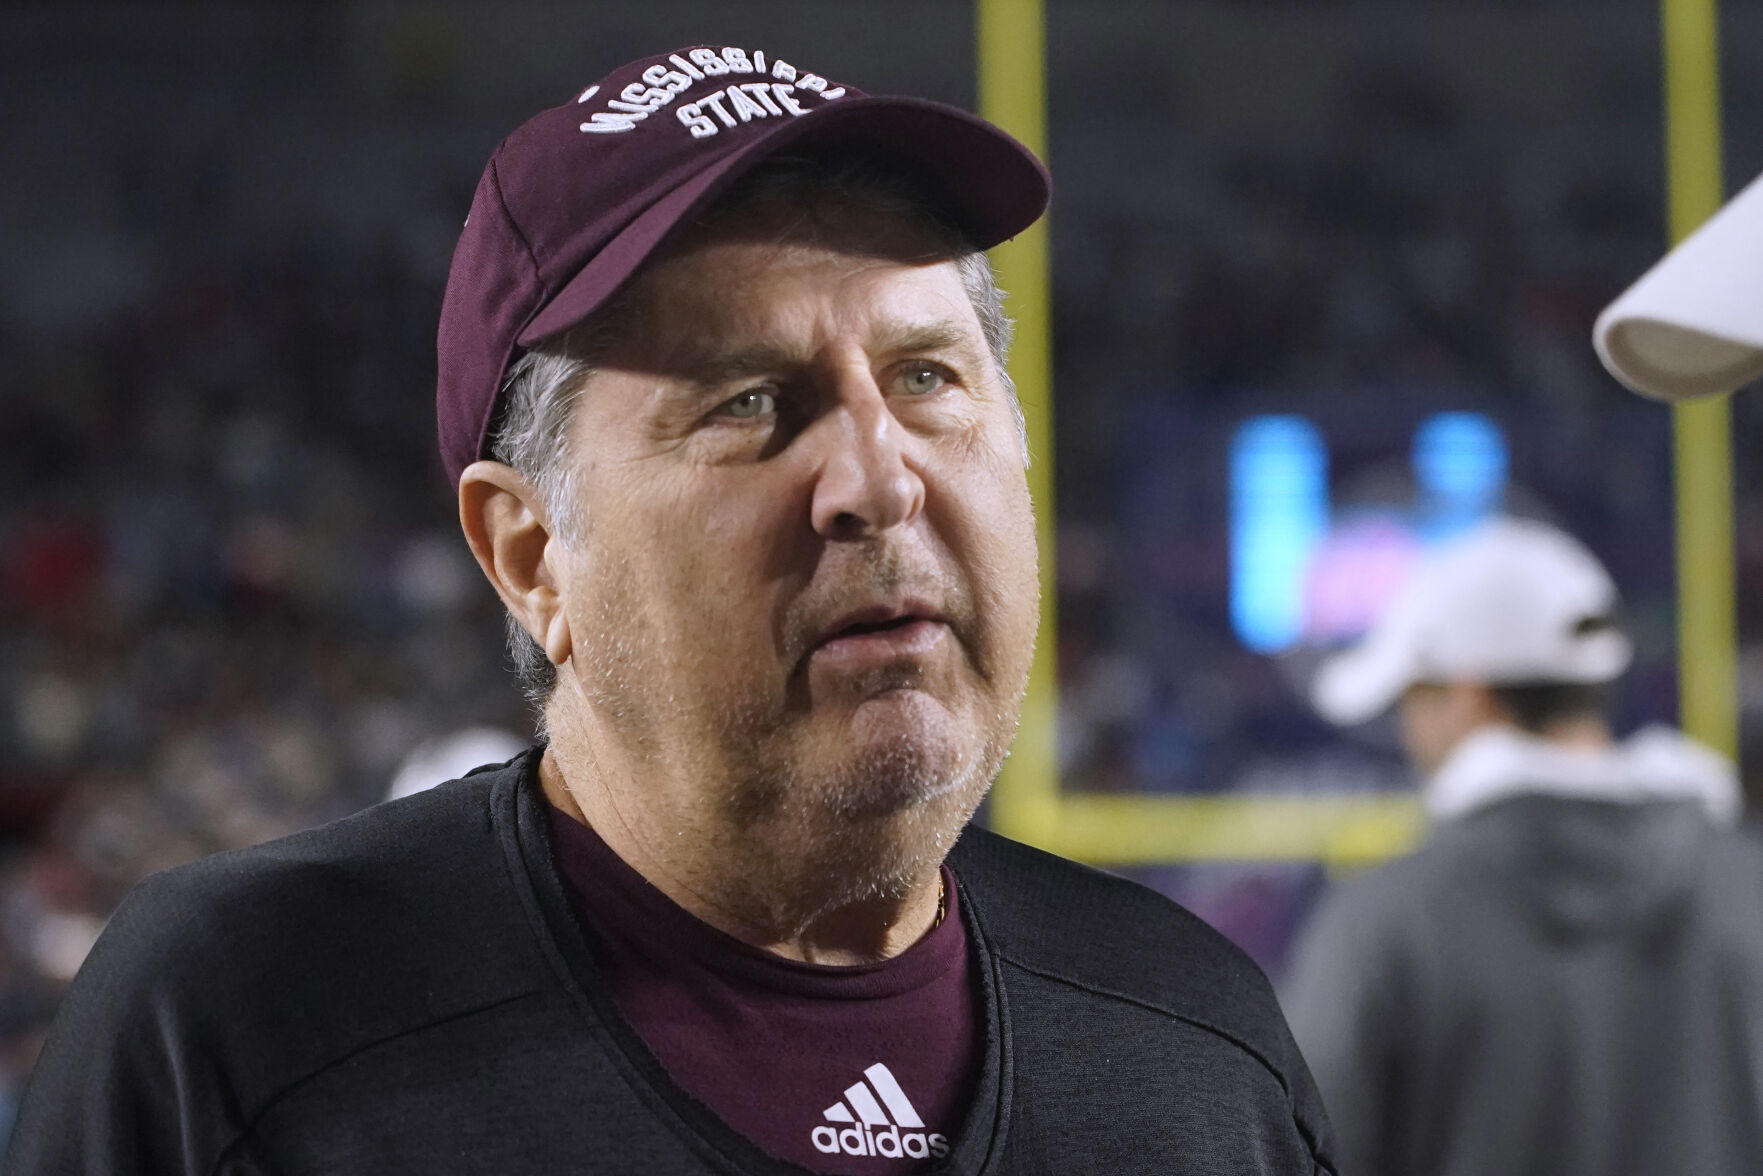 Mississippi State football coach Mike Leach dies after